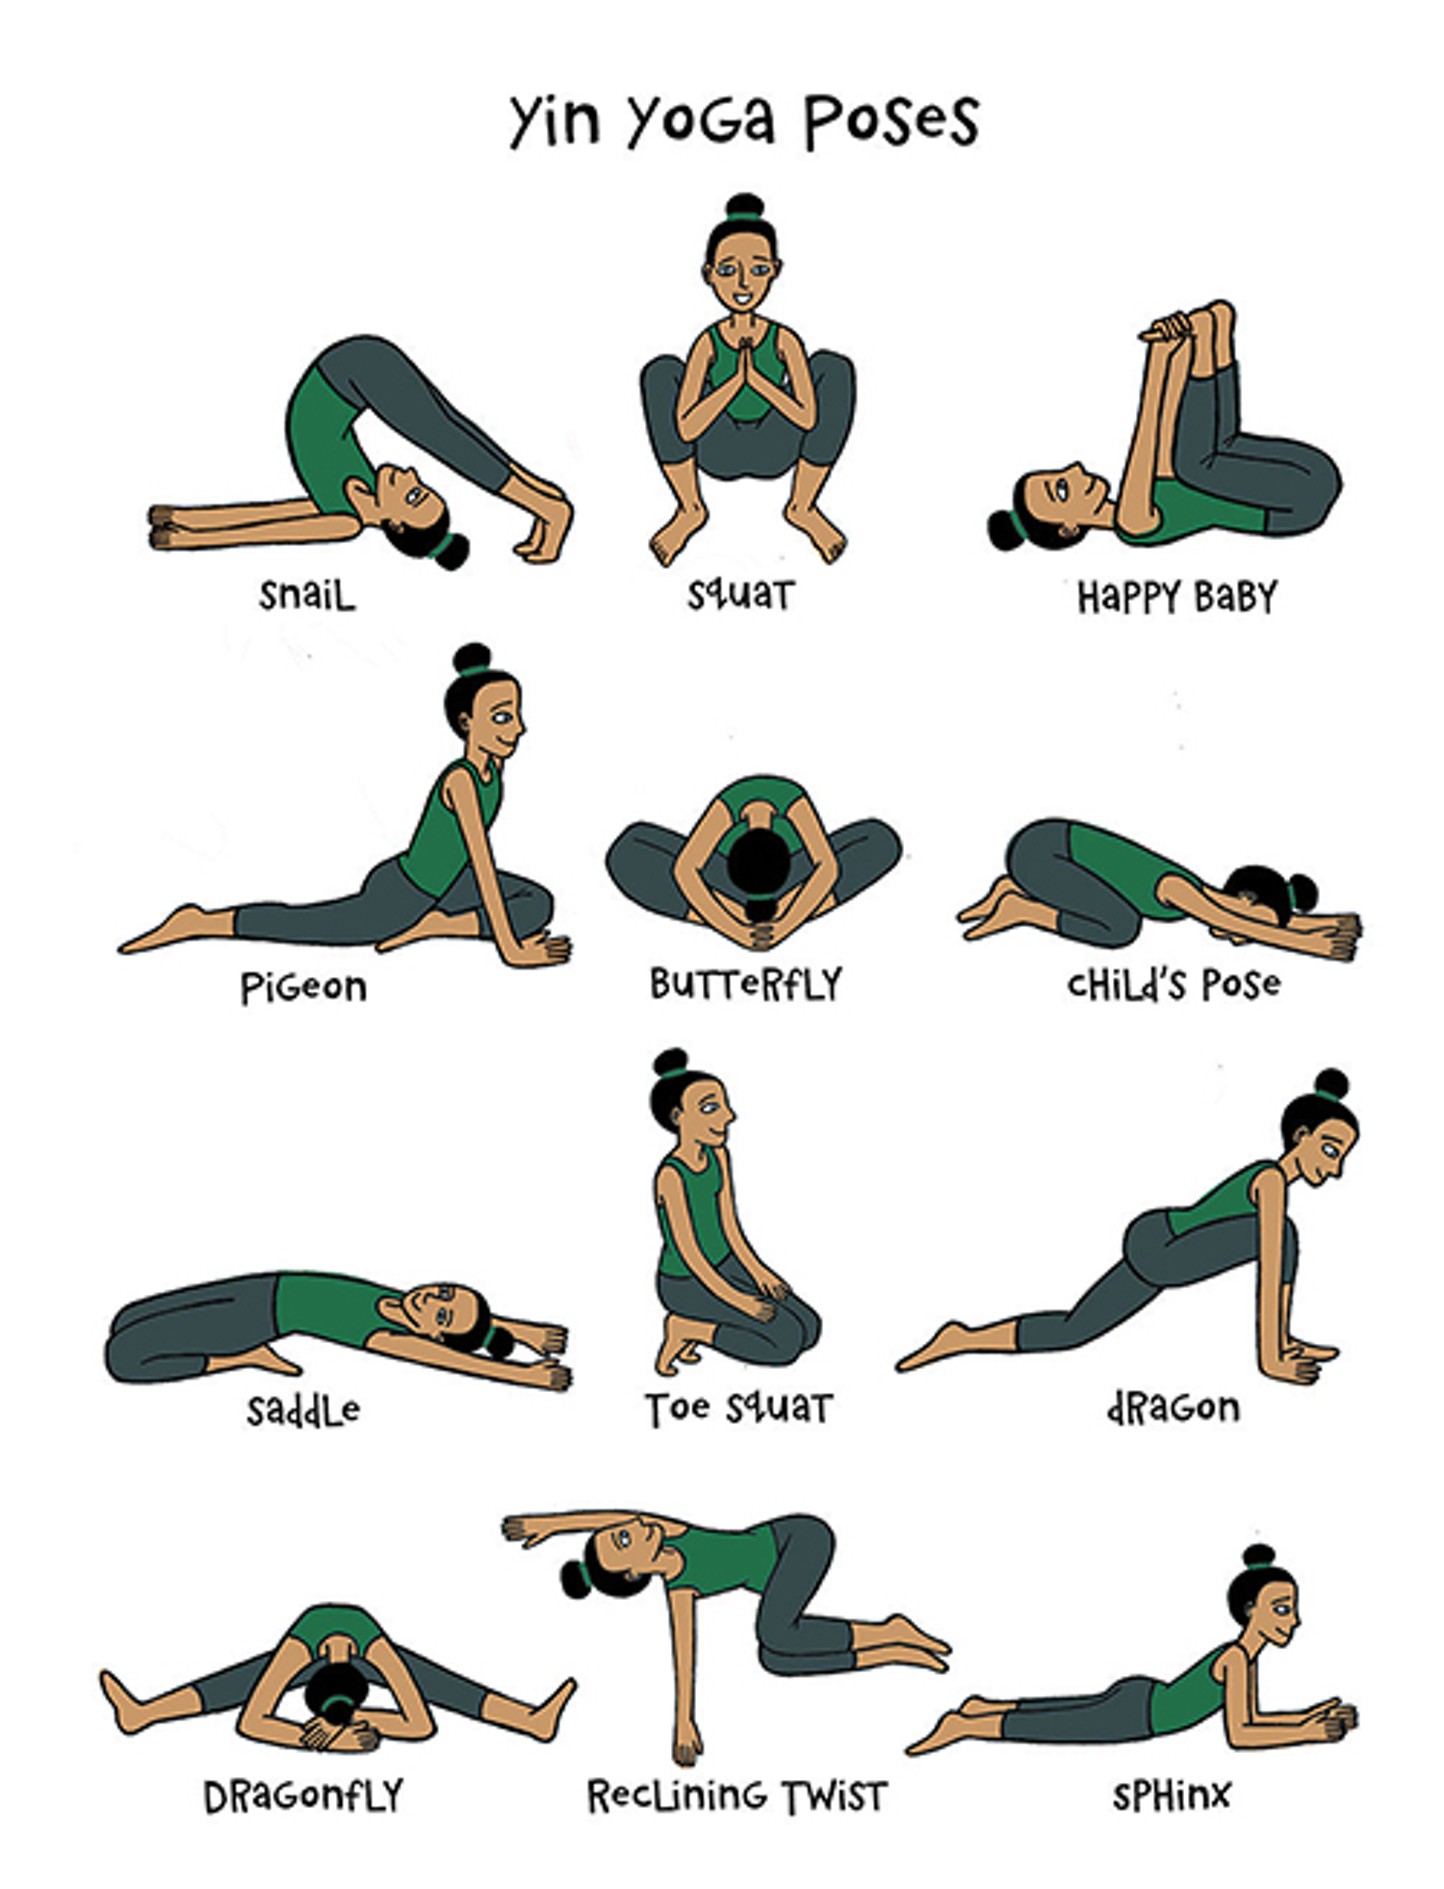 Picture of Yin Yoga poses